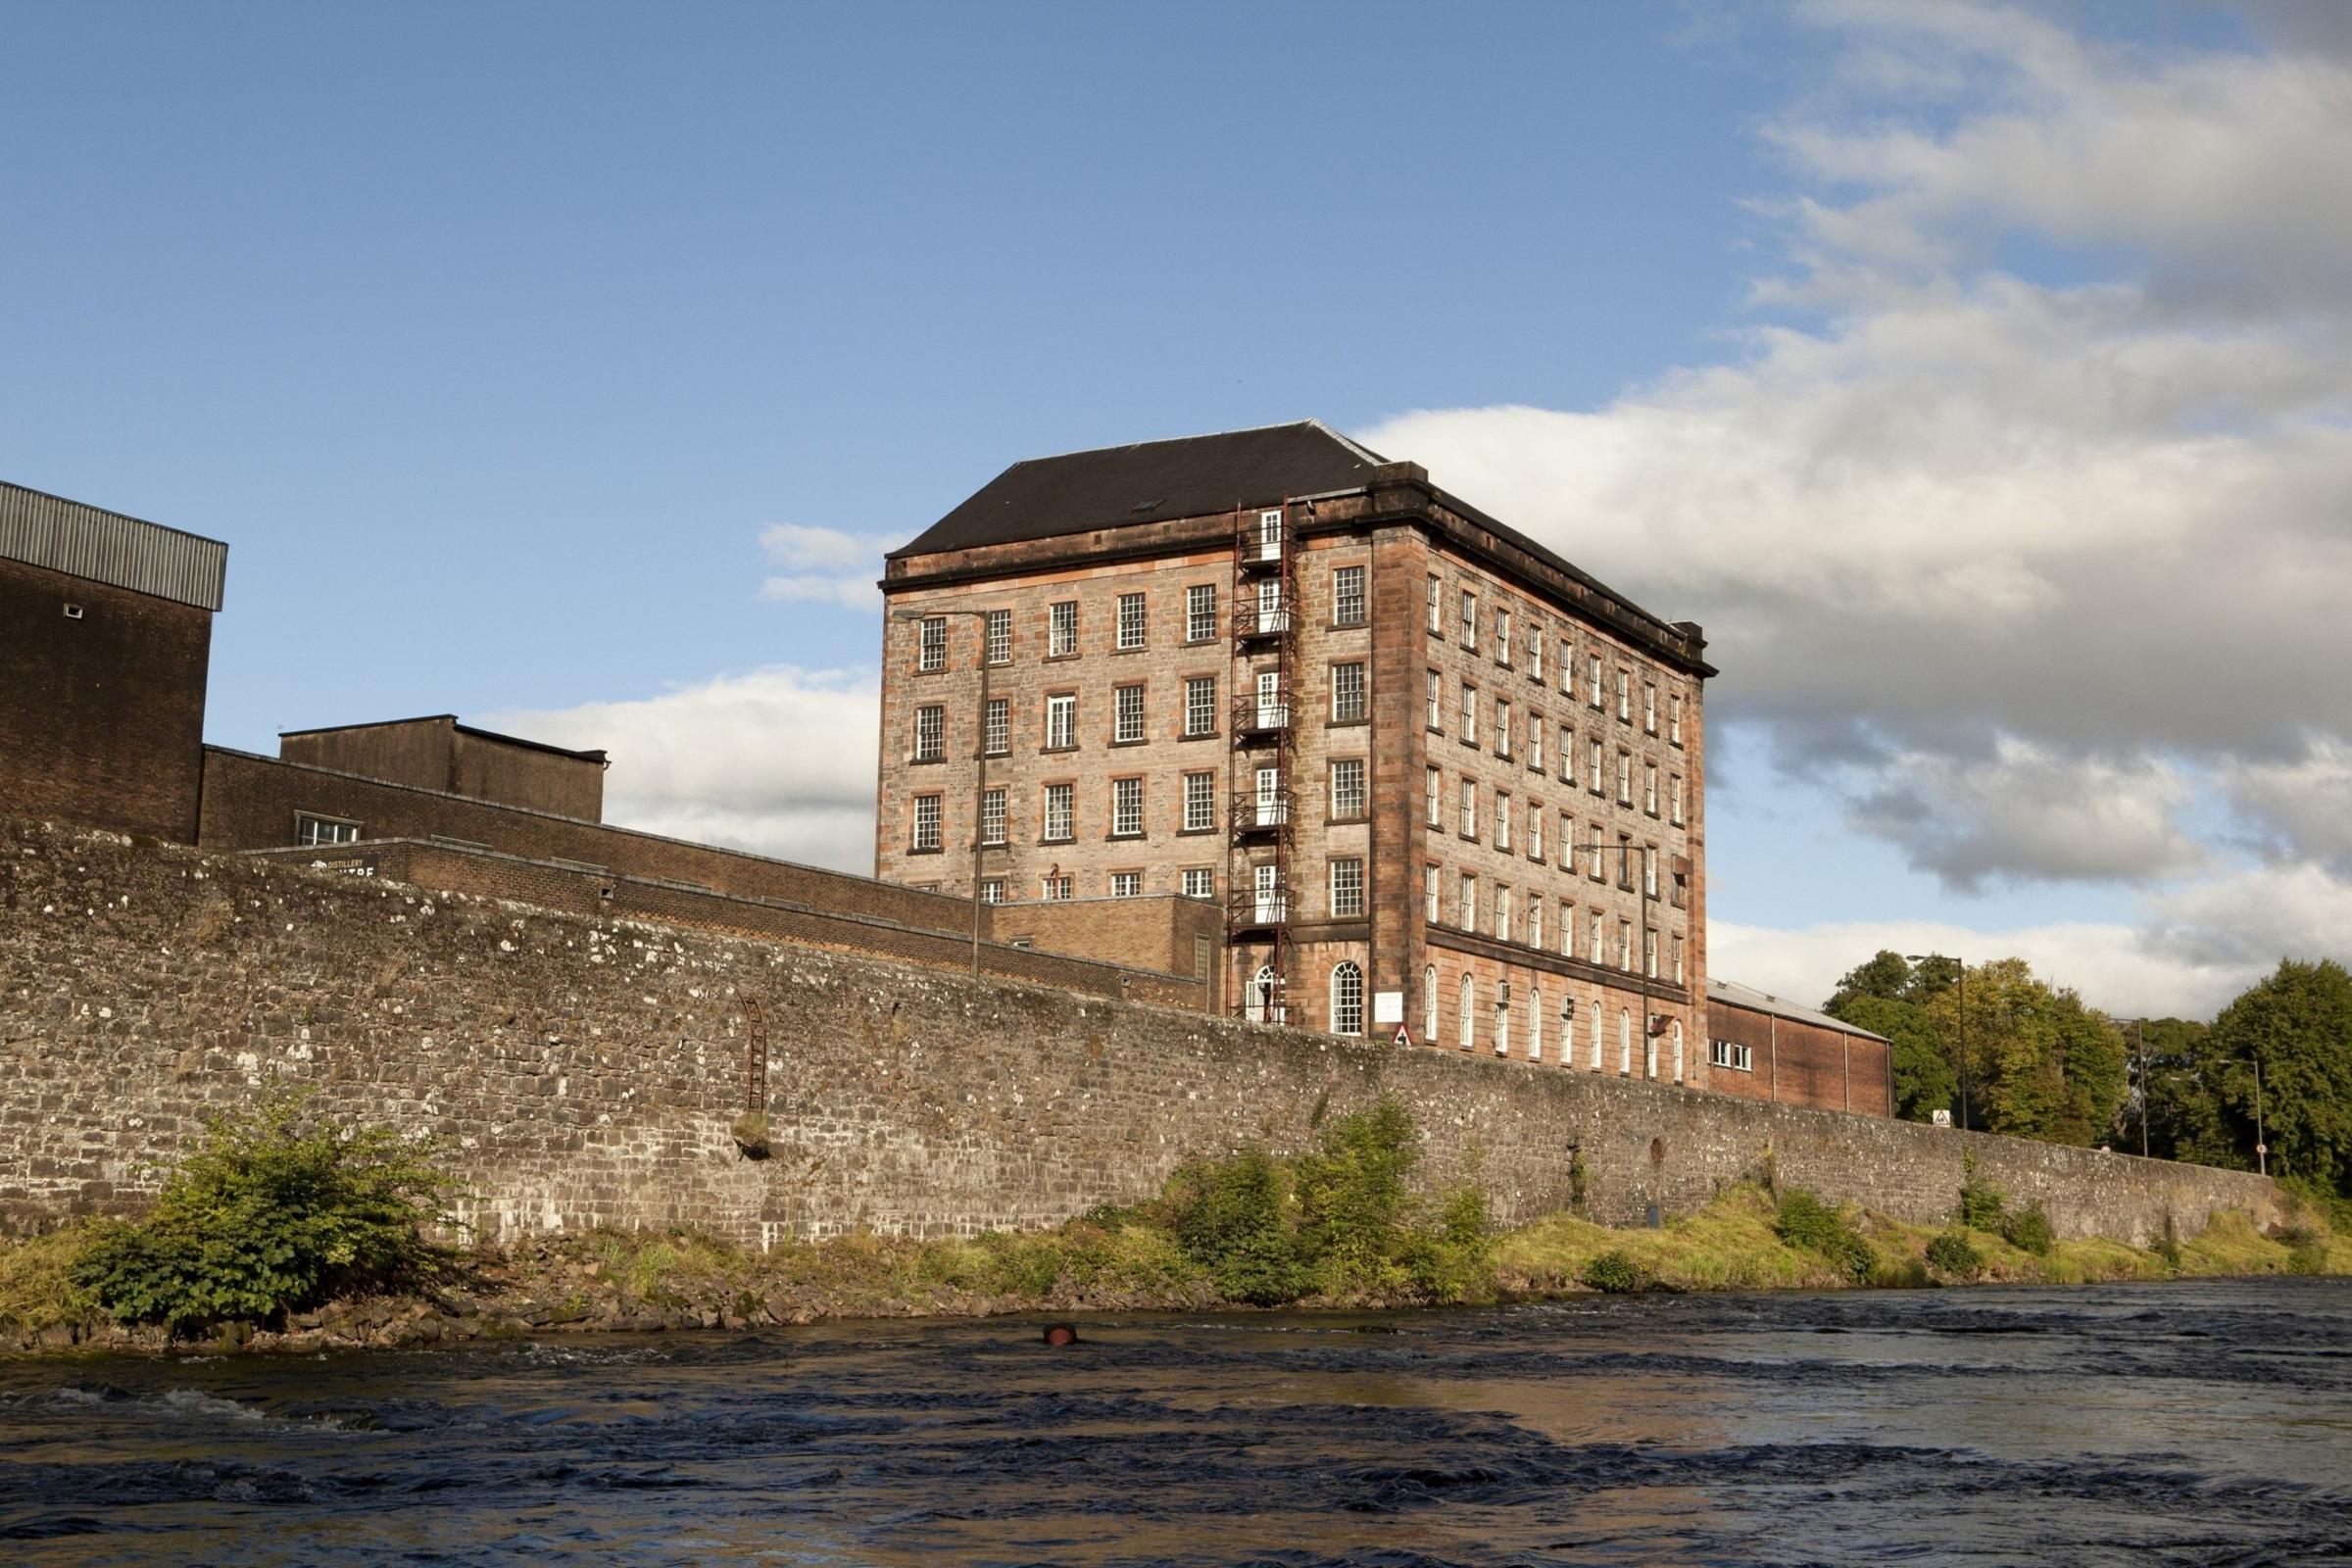 Deanston and Tobermoray distilleries are also in the Distell Group